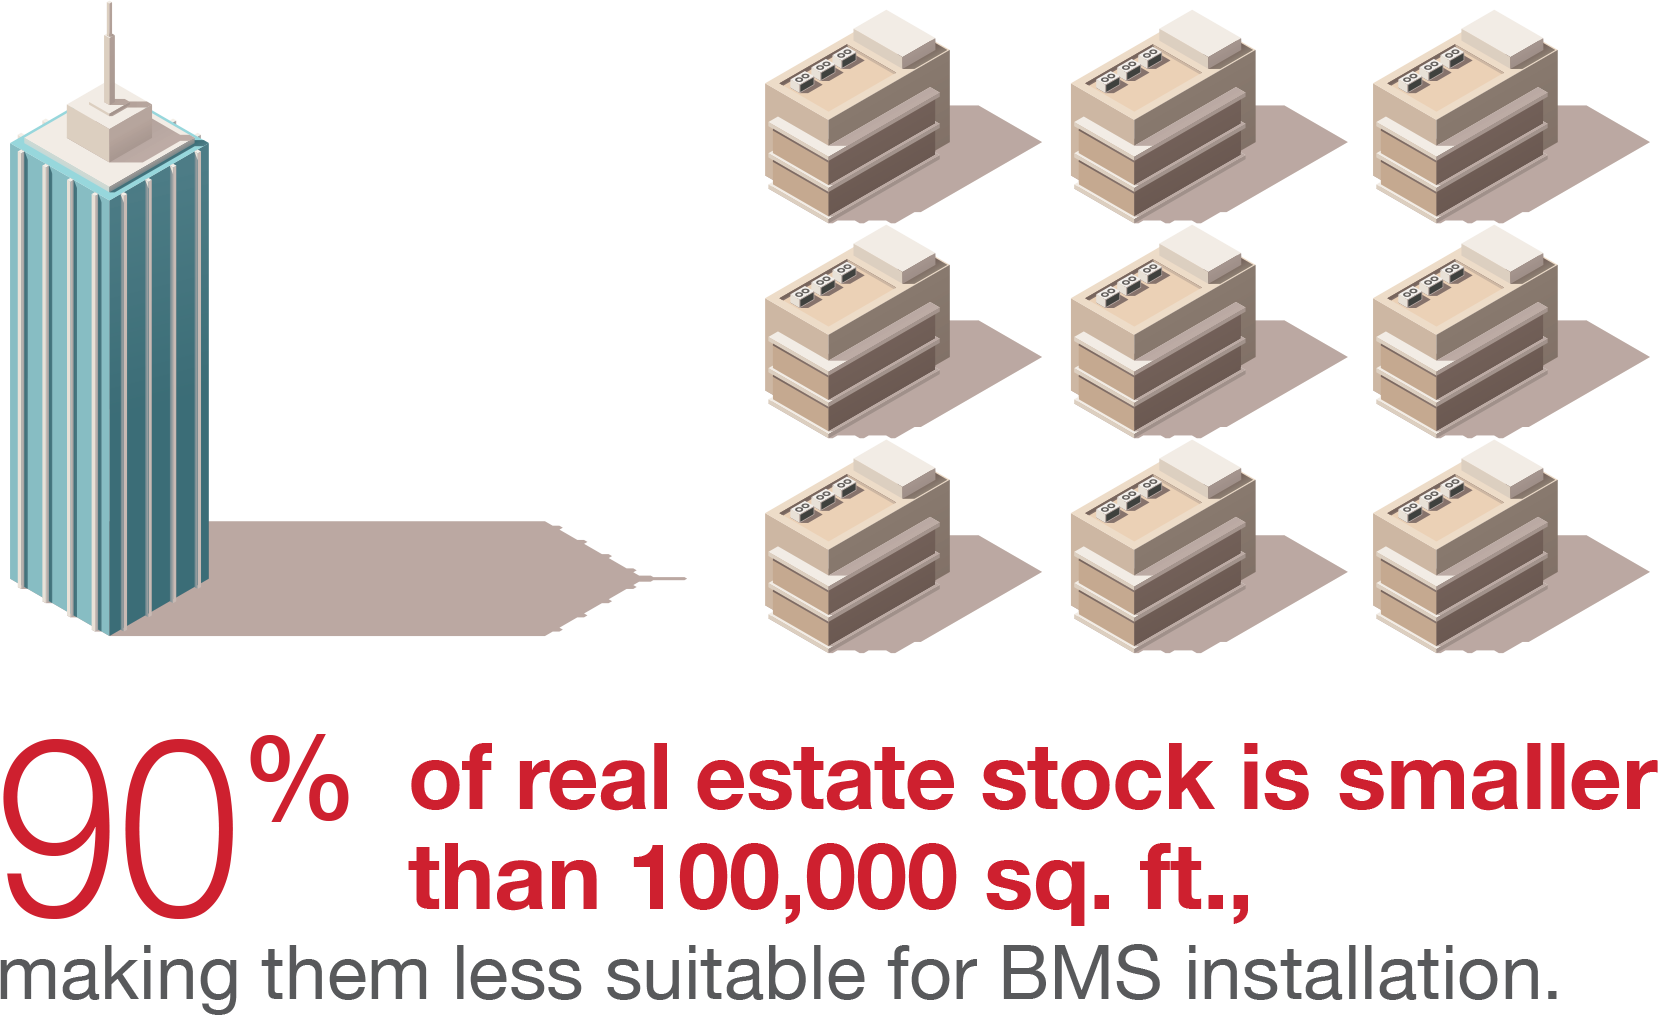 90 percent of real estate stock is less suitable for bms installation